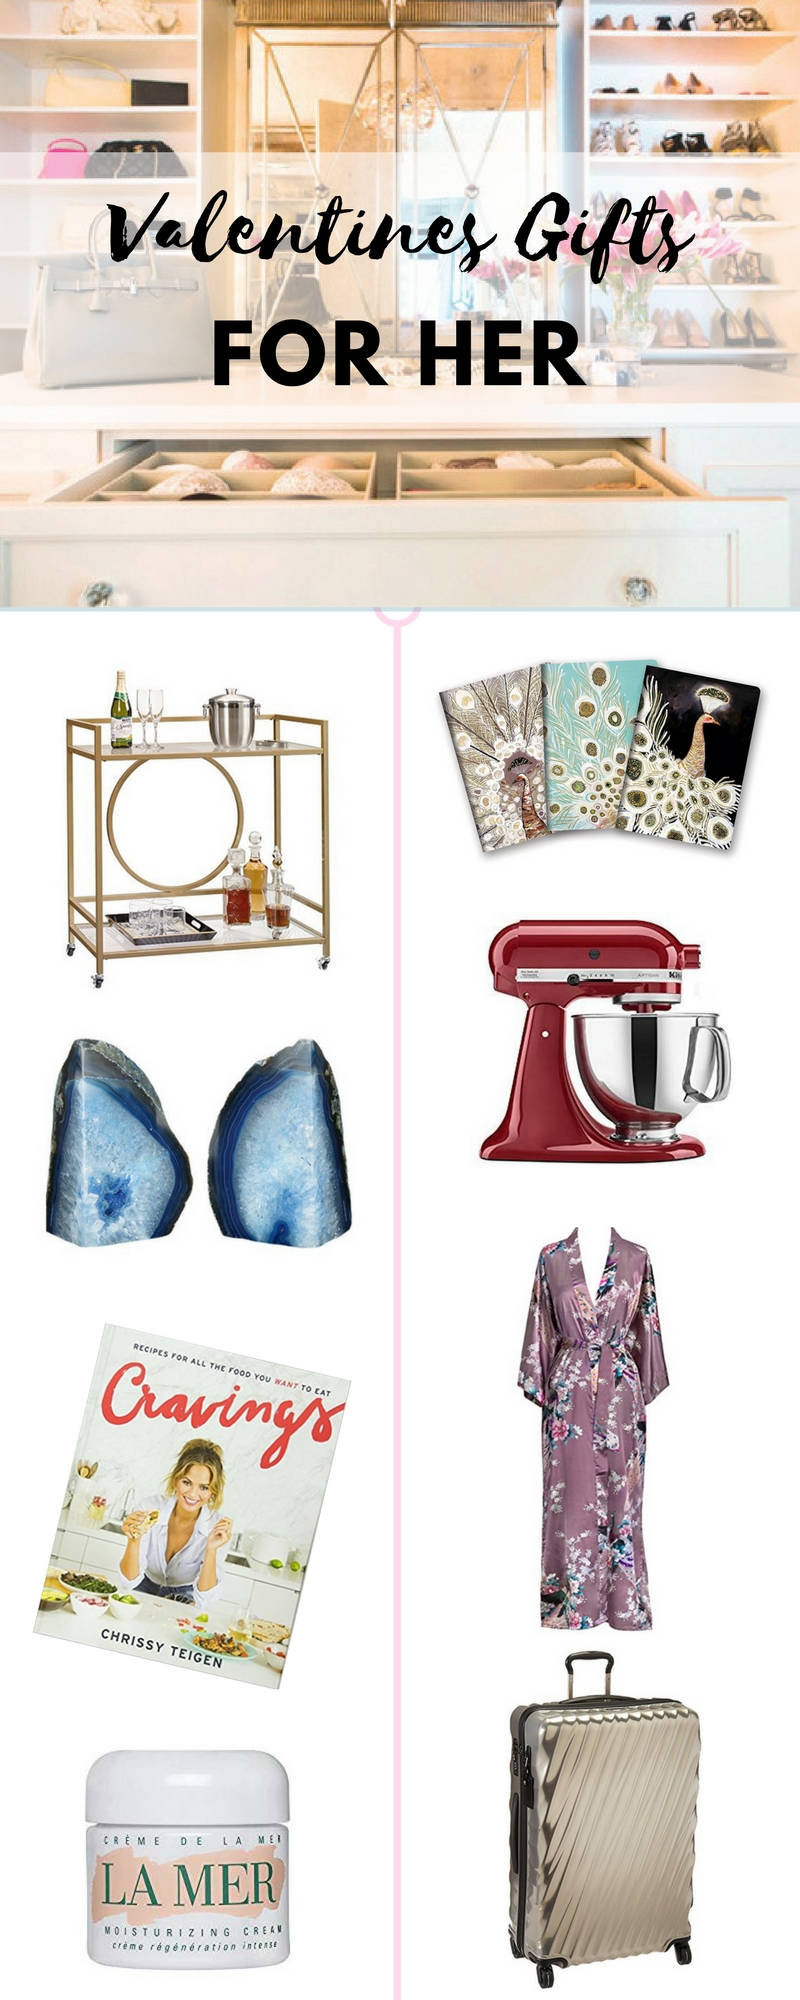 Here are some great gift ideas for her! 